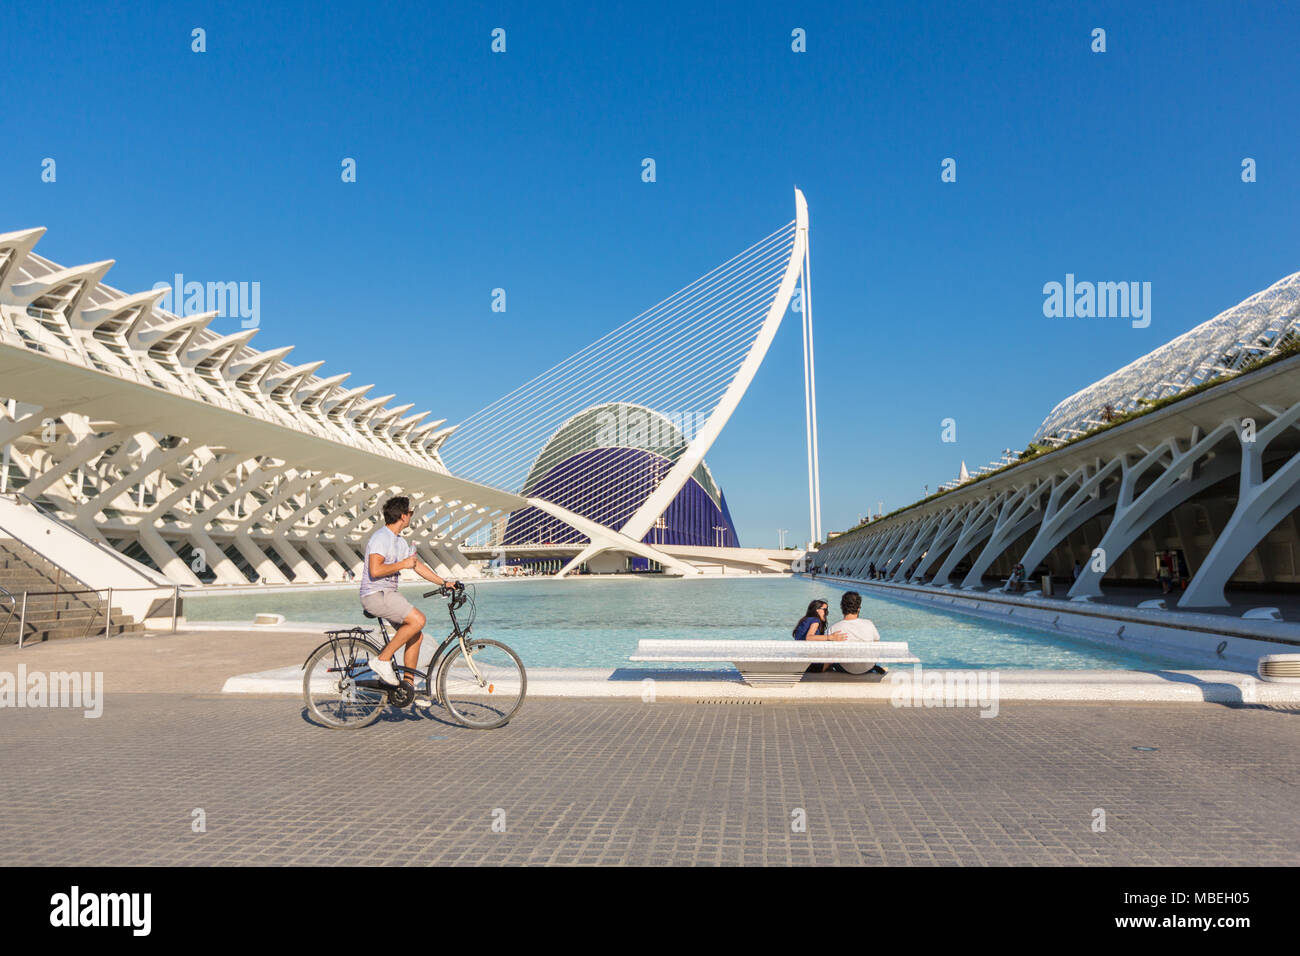 VALENCIA, SPAIN - JUNE 18, 2015: People relax at the pool with a view on Oceanografic in The city of arts and sciencies in Valencia, Spain Stock Photo